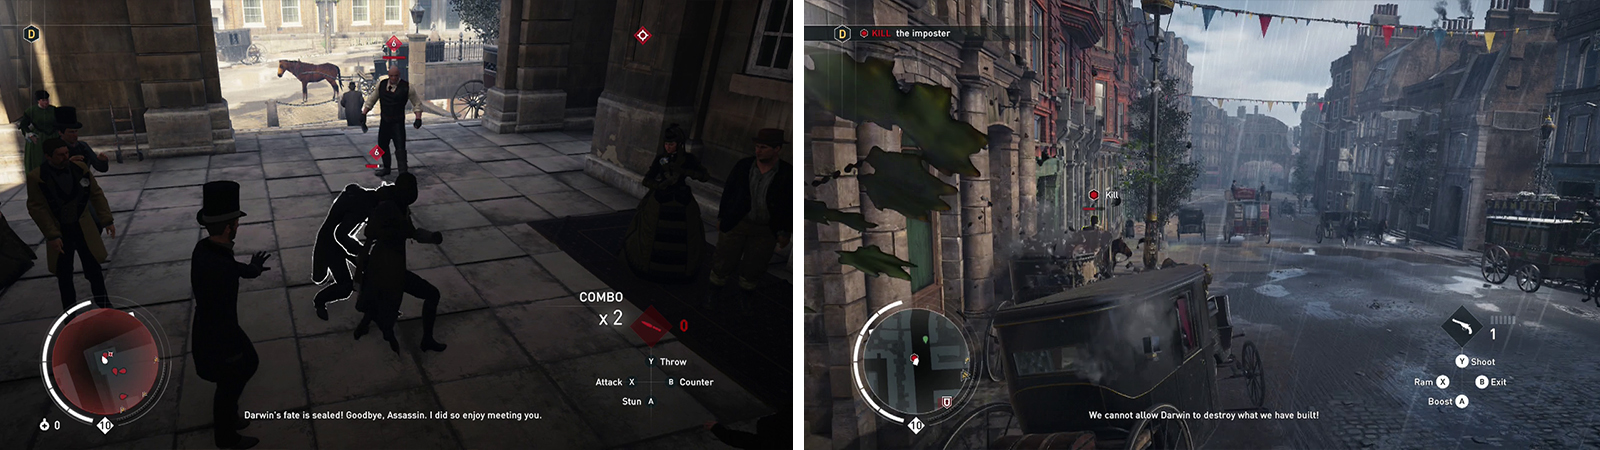 As soon as you exit the station you'll be attacked (left). Grab a carriage and chase down and kill the target (right).